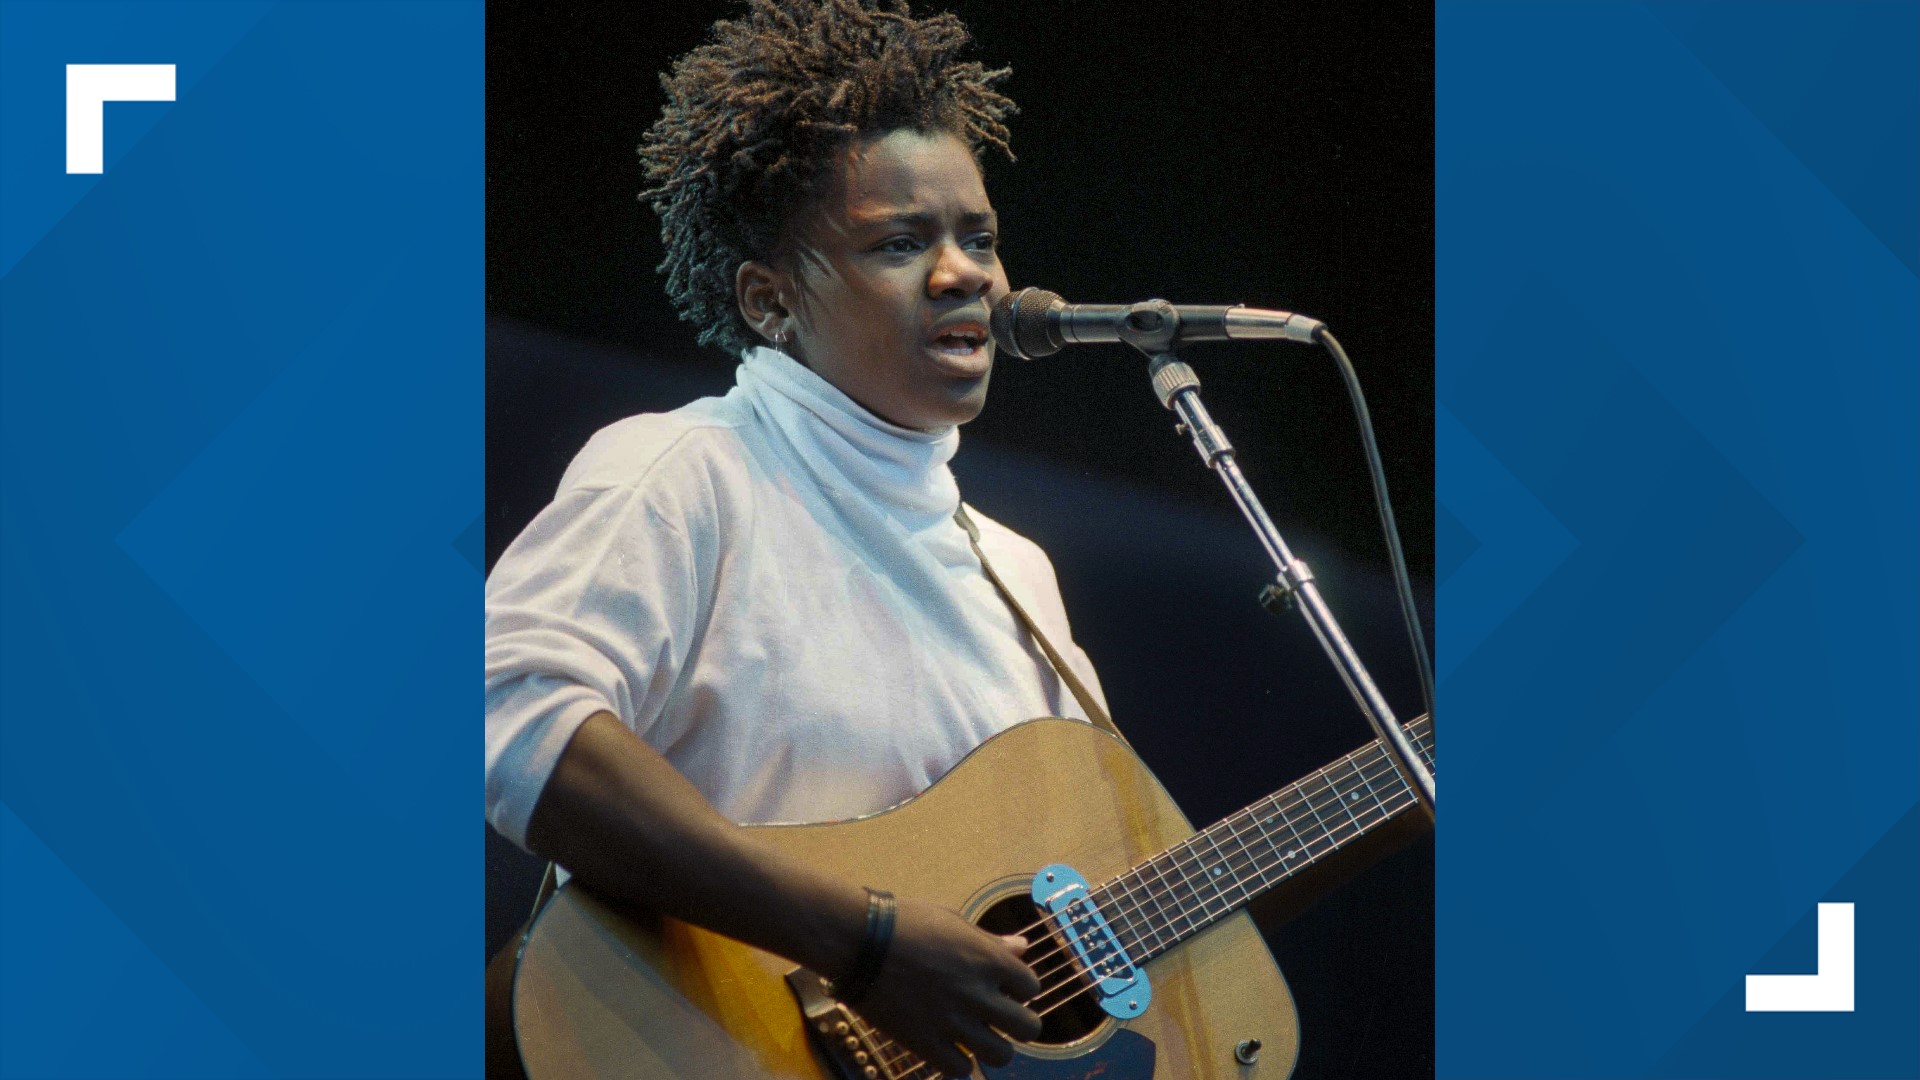 Tracy Chapman's 'Fast Car' wins CMA Award 35 years after debut